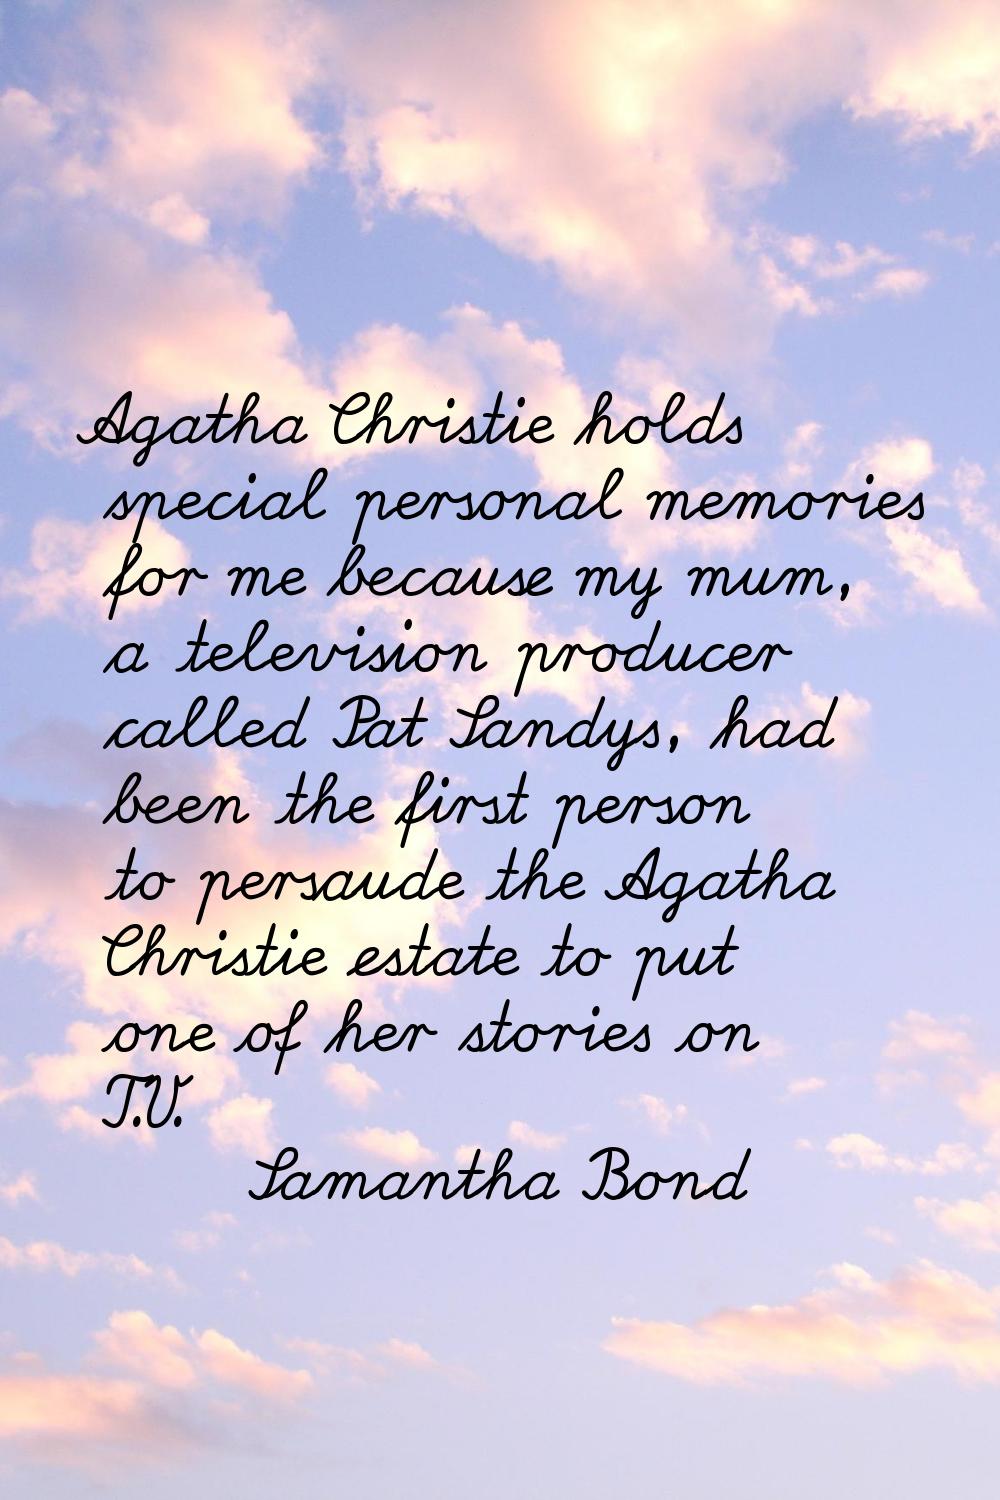 Agatha Christie holds special personal memories for me because my mum, a television producer called